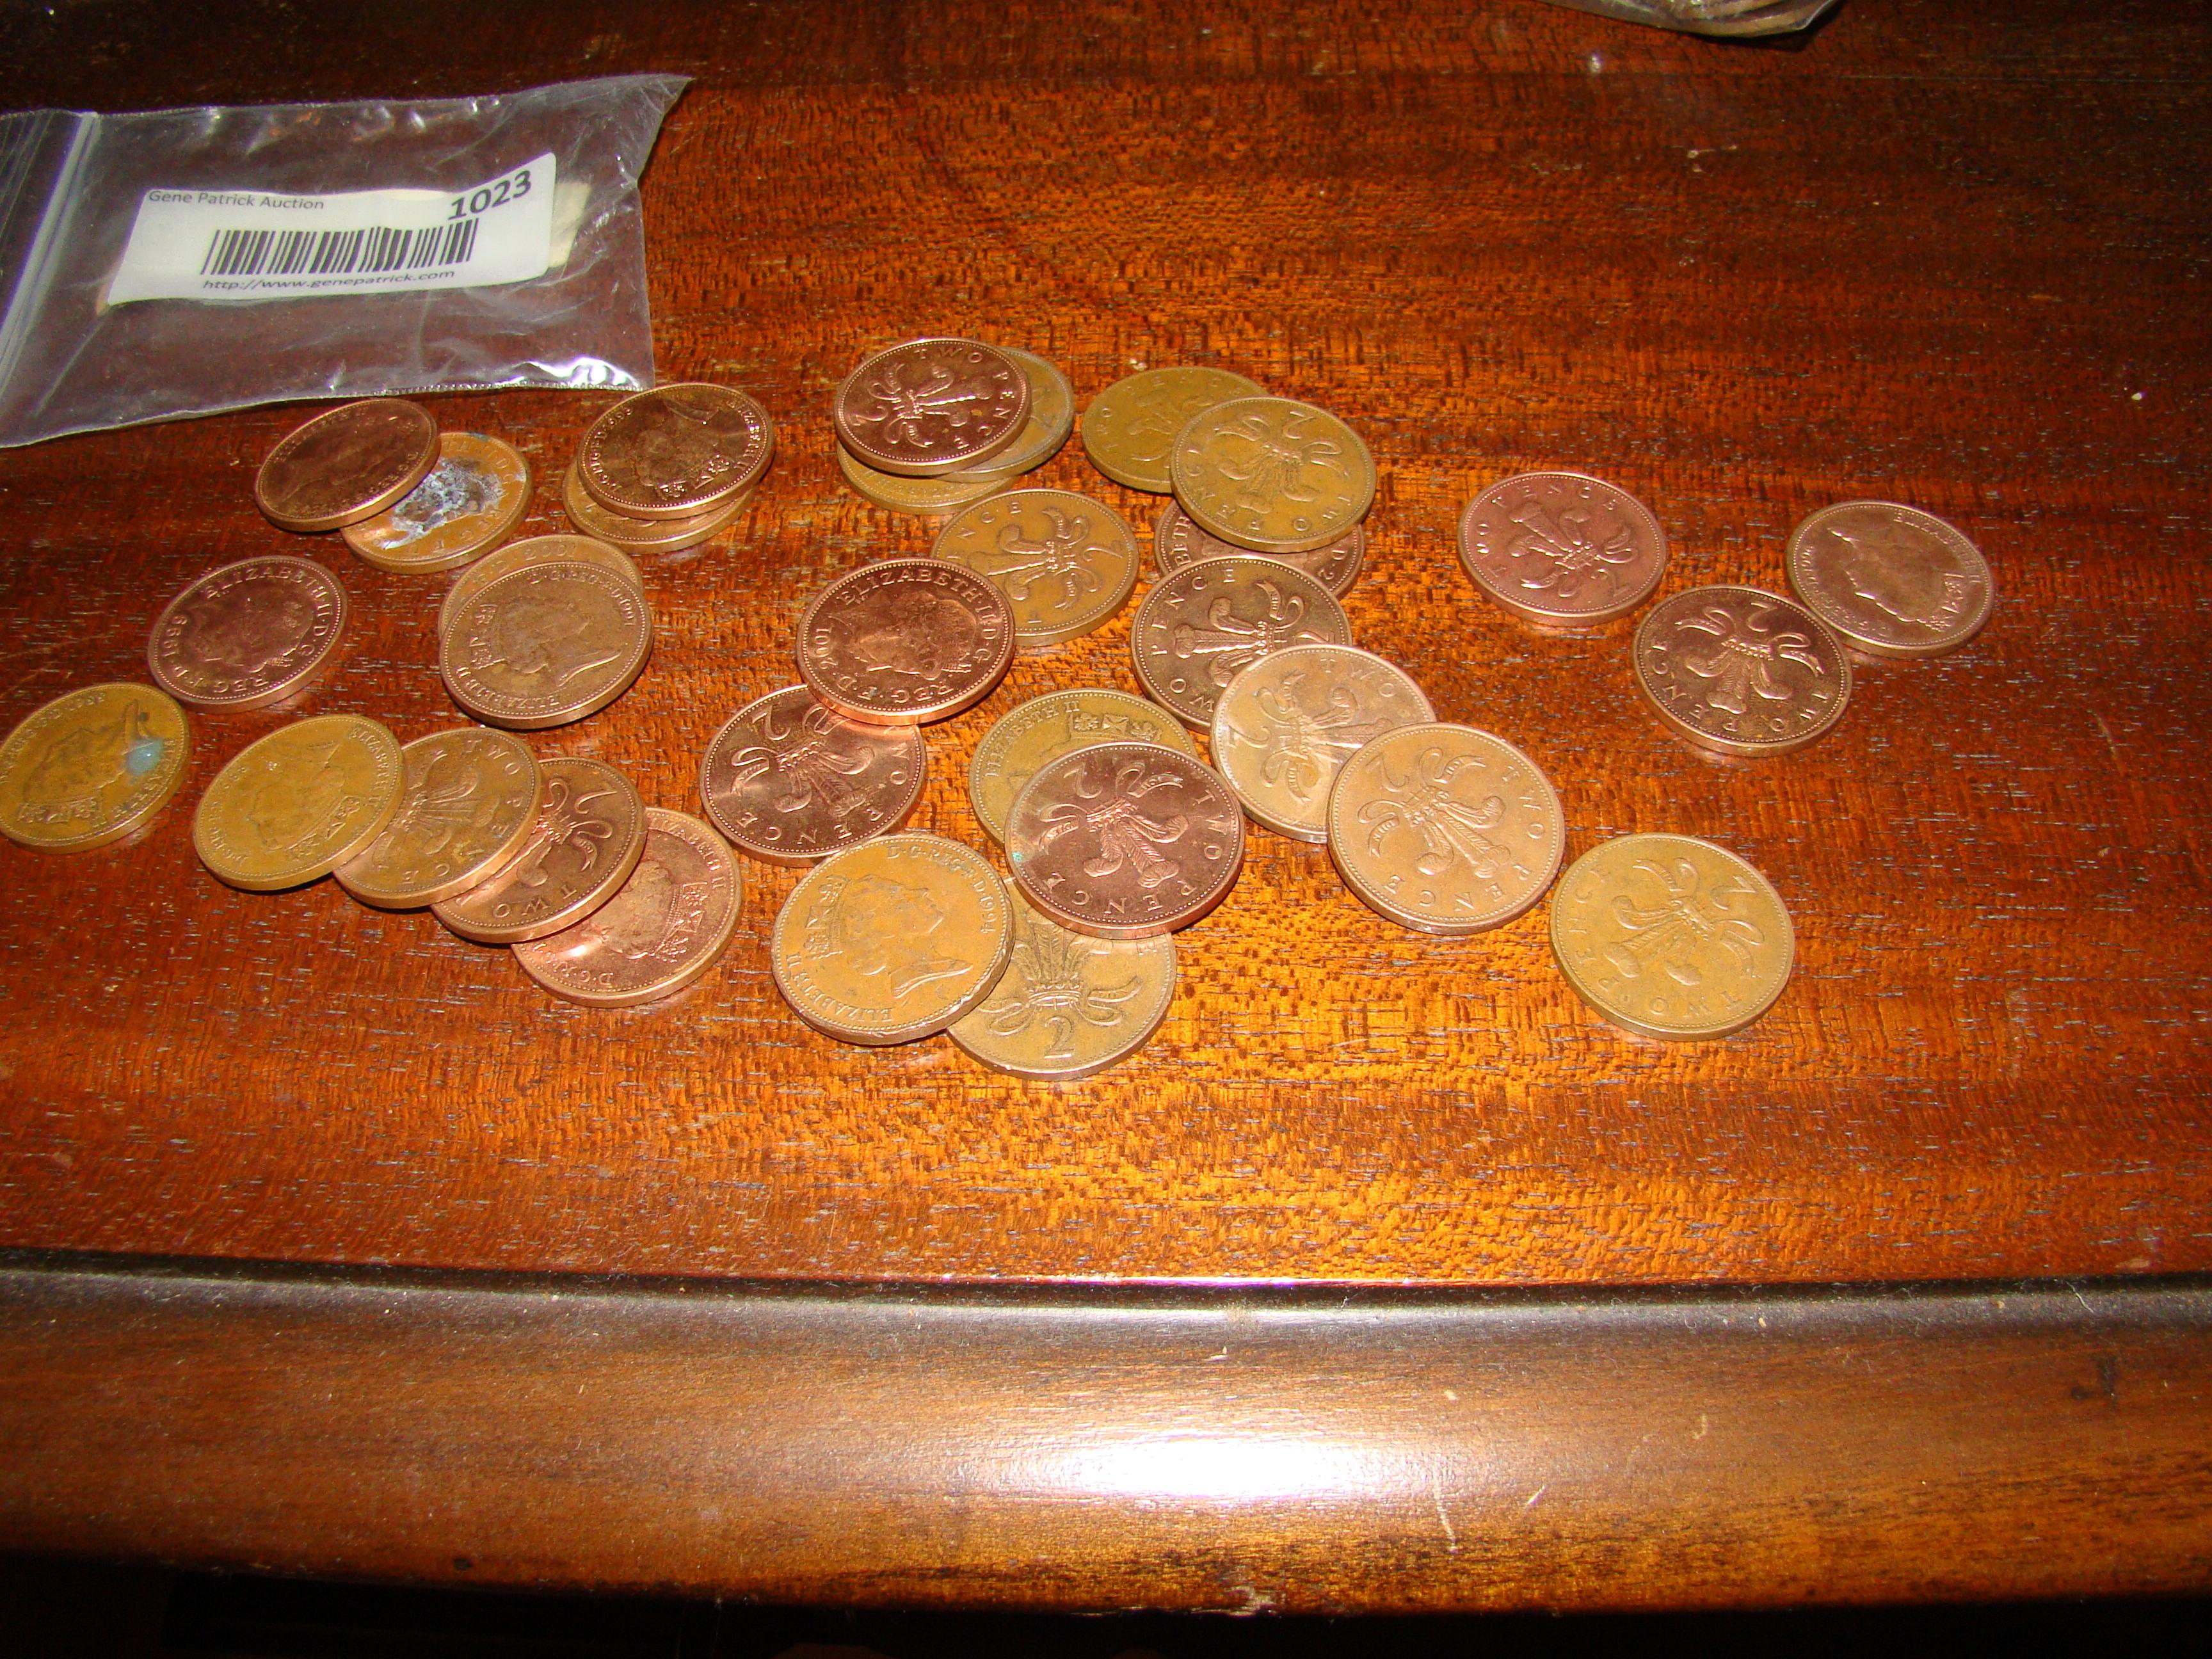 BAG OF 2 PENCE COINS